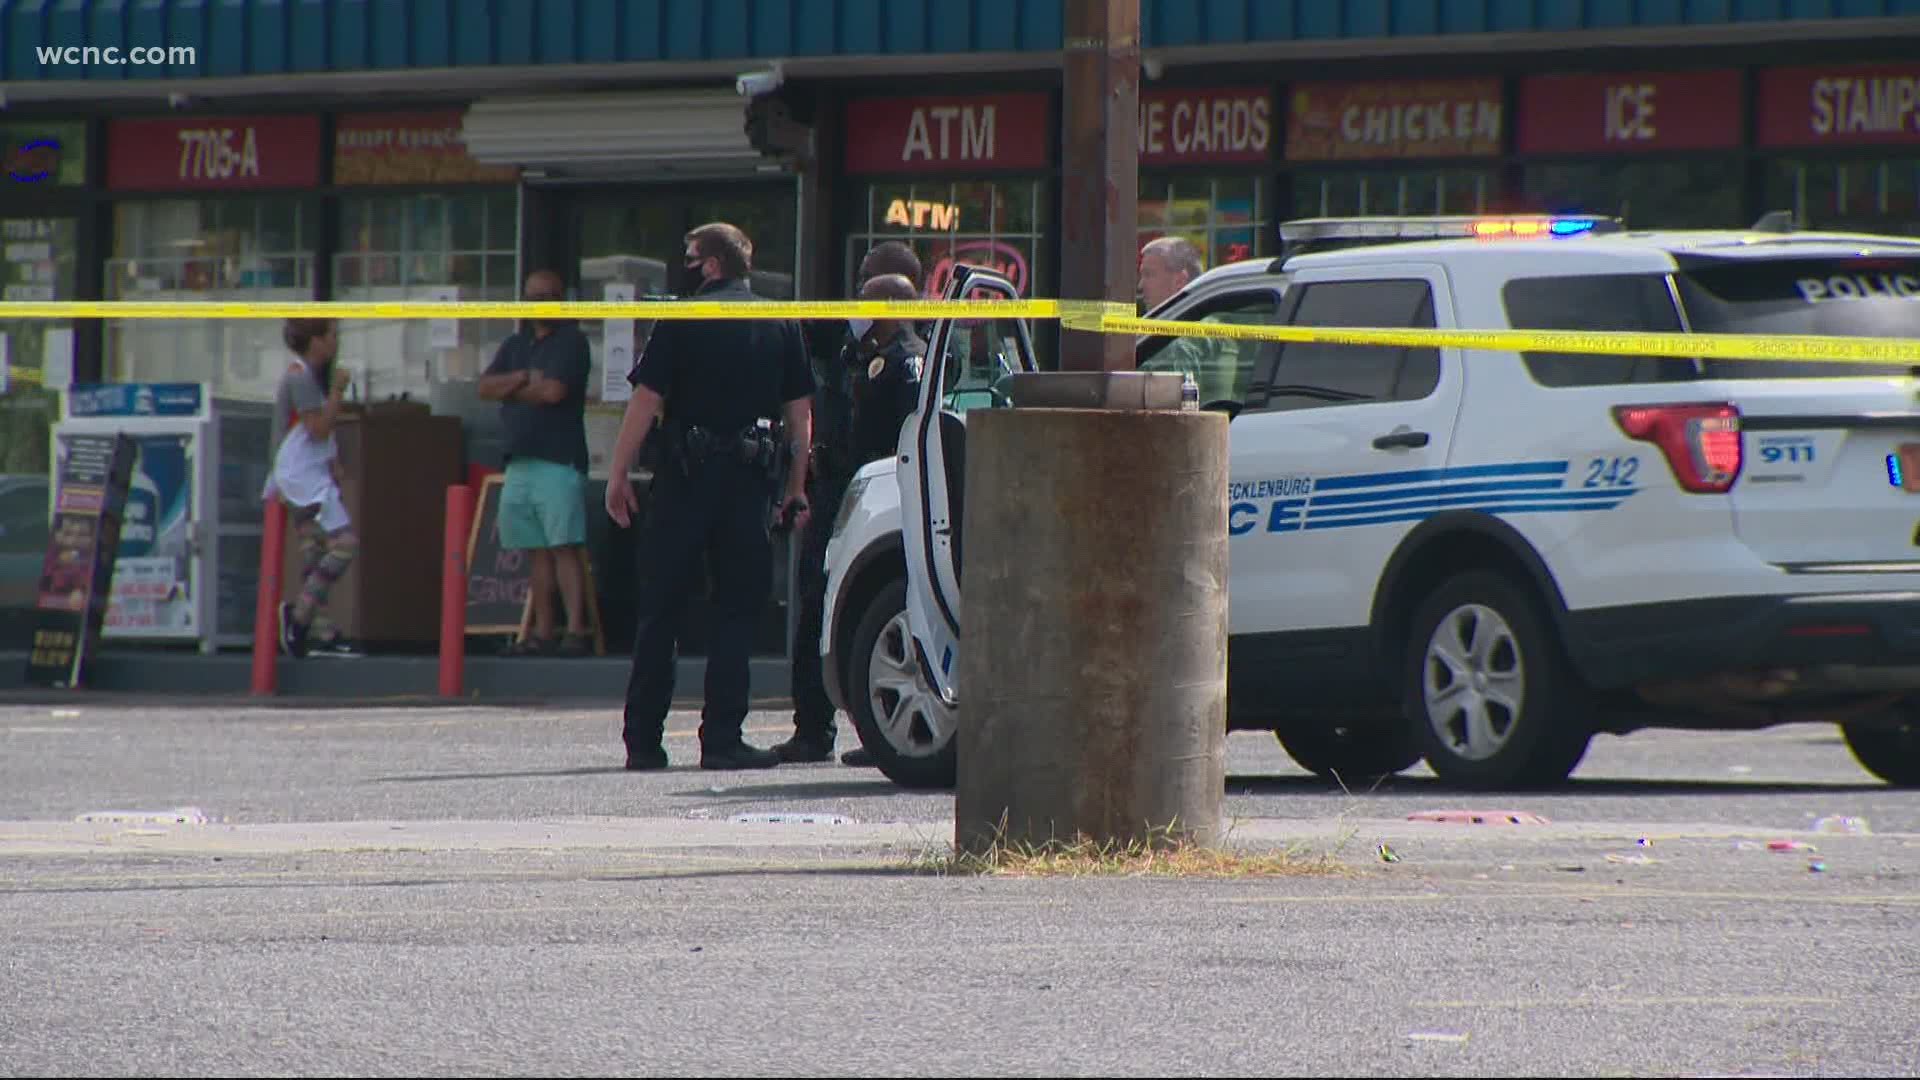 CMPD say a 22-year-old was shot and killed off of South Tryon.